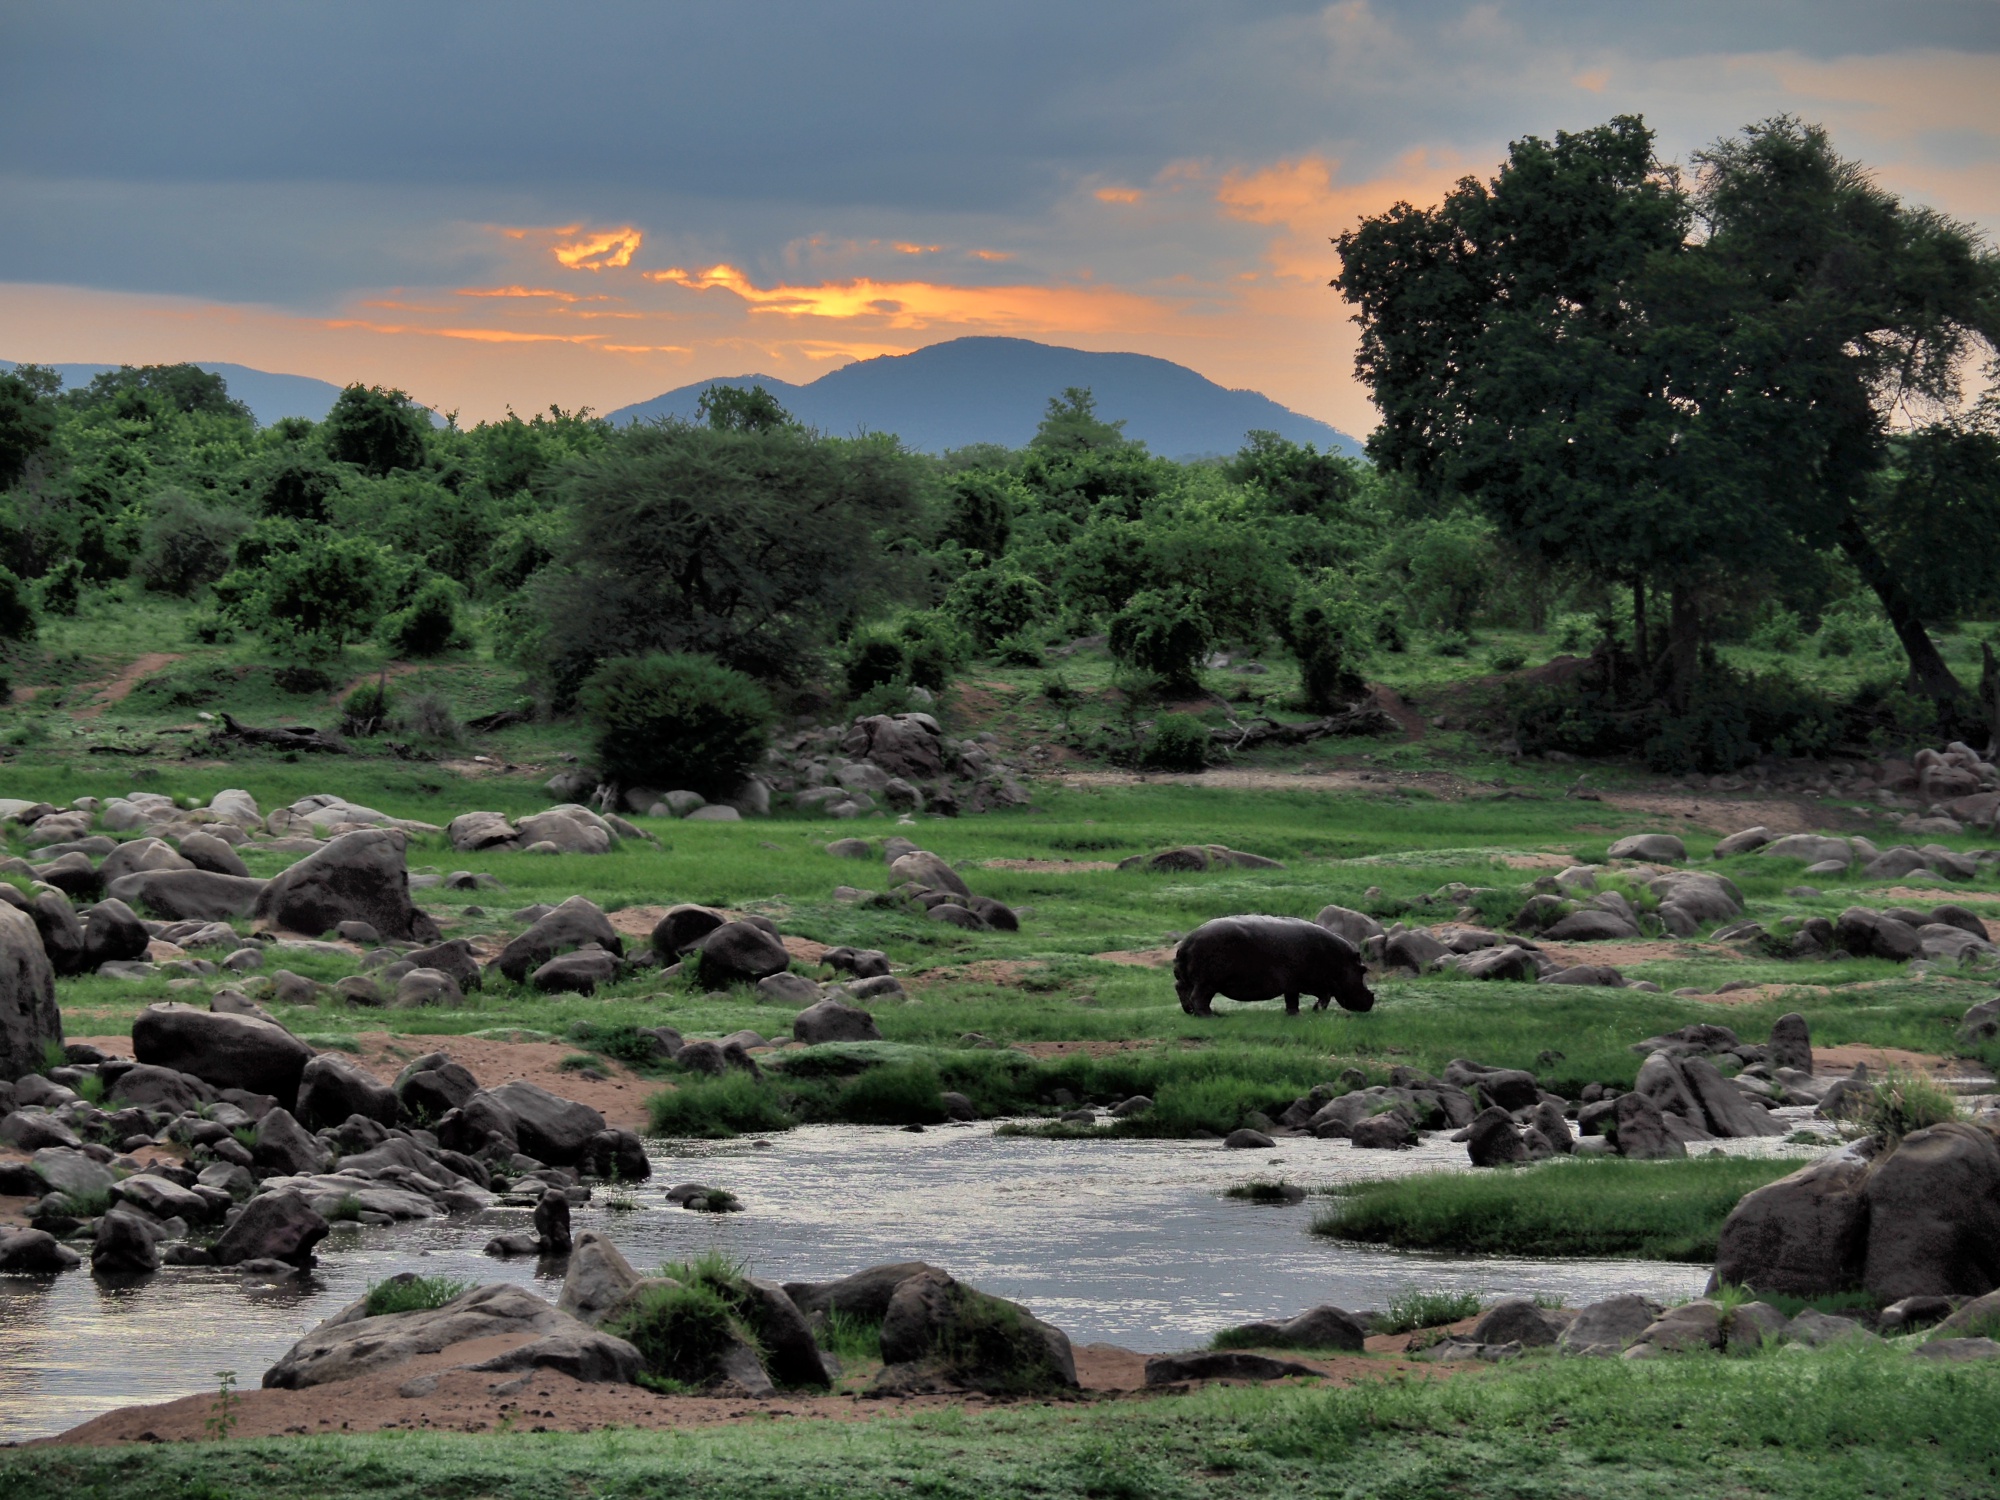 View off the balcony at the Ruaha River Lodge